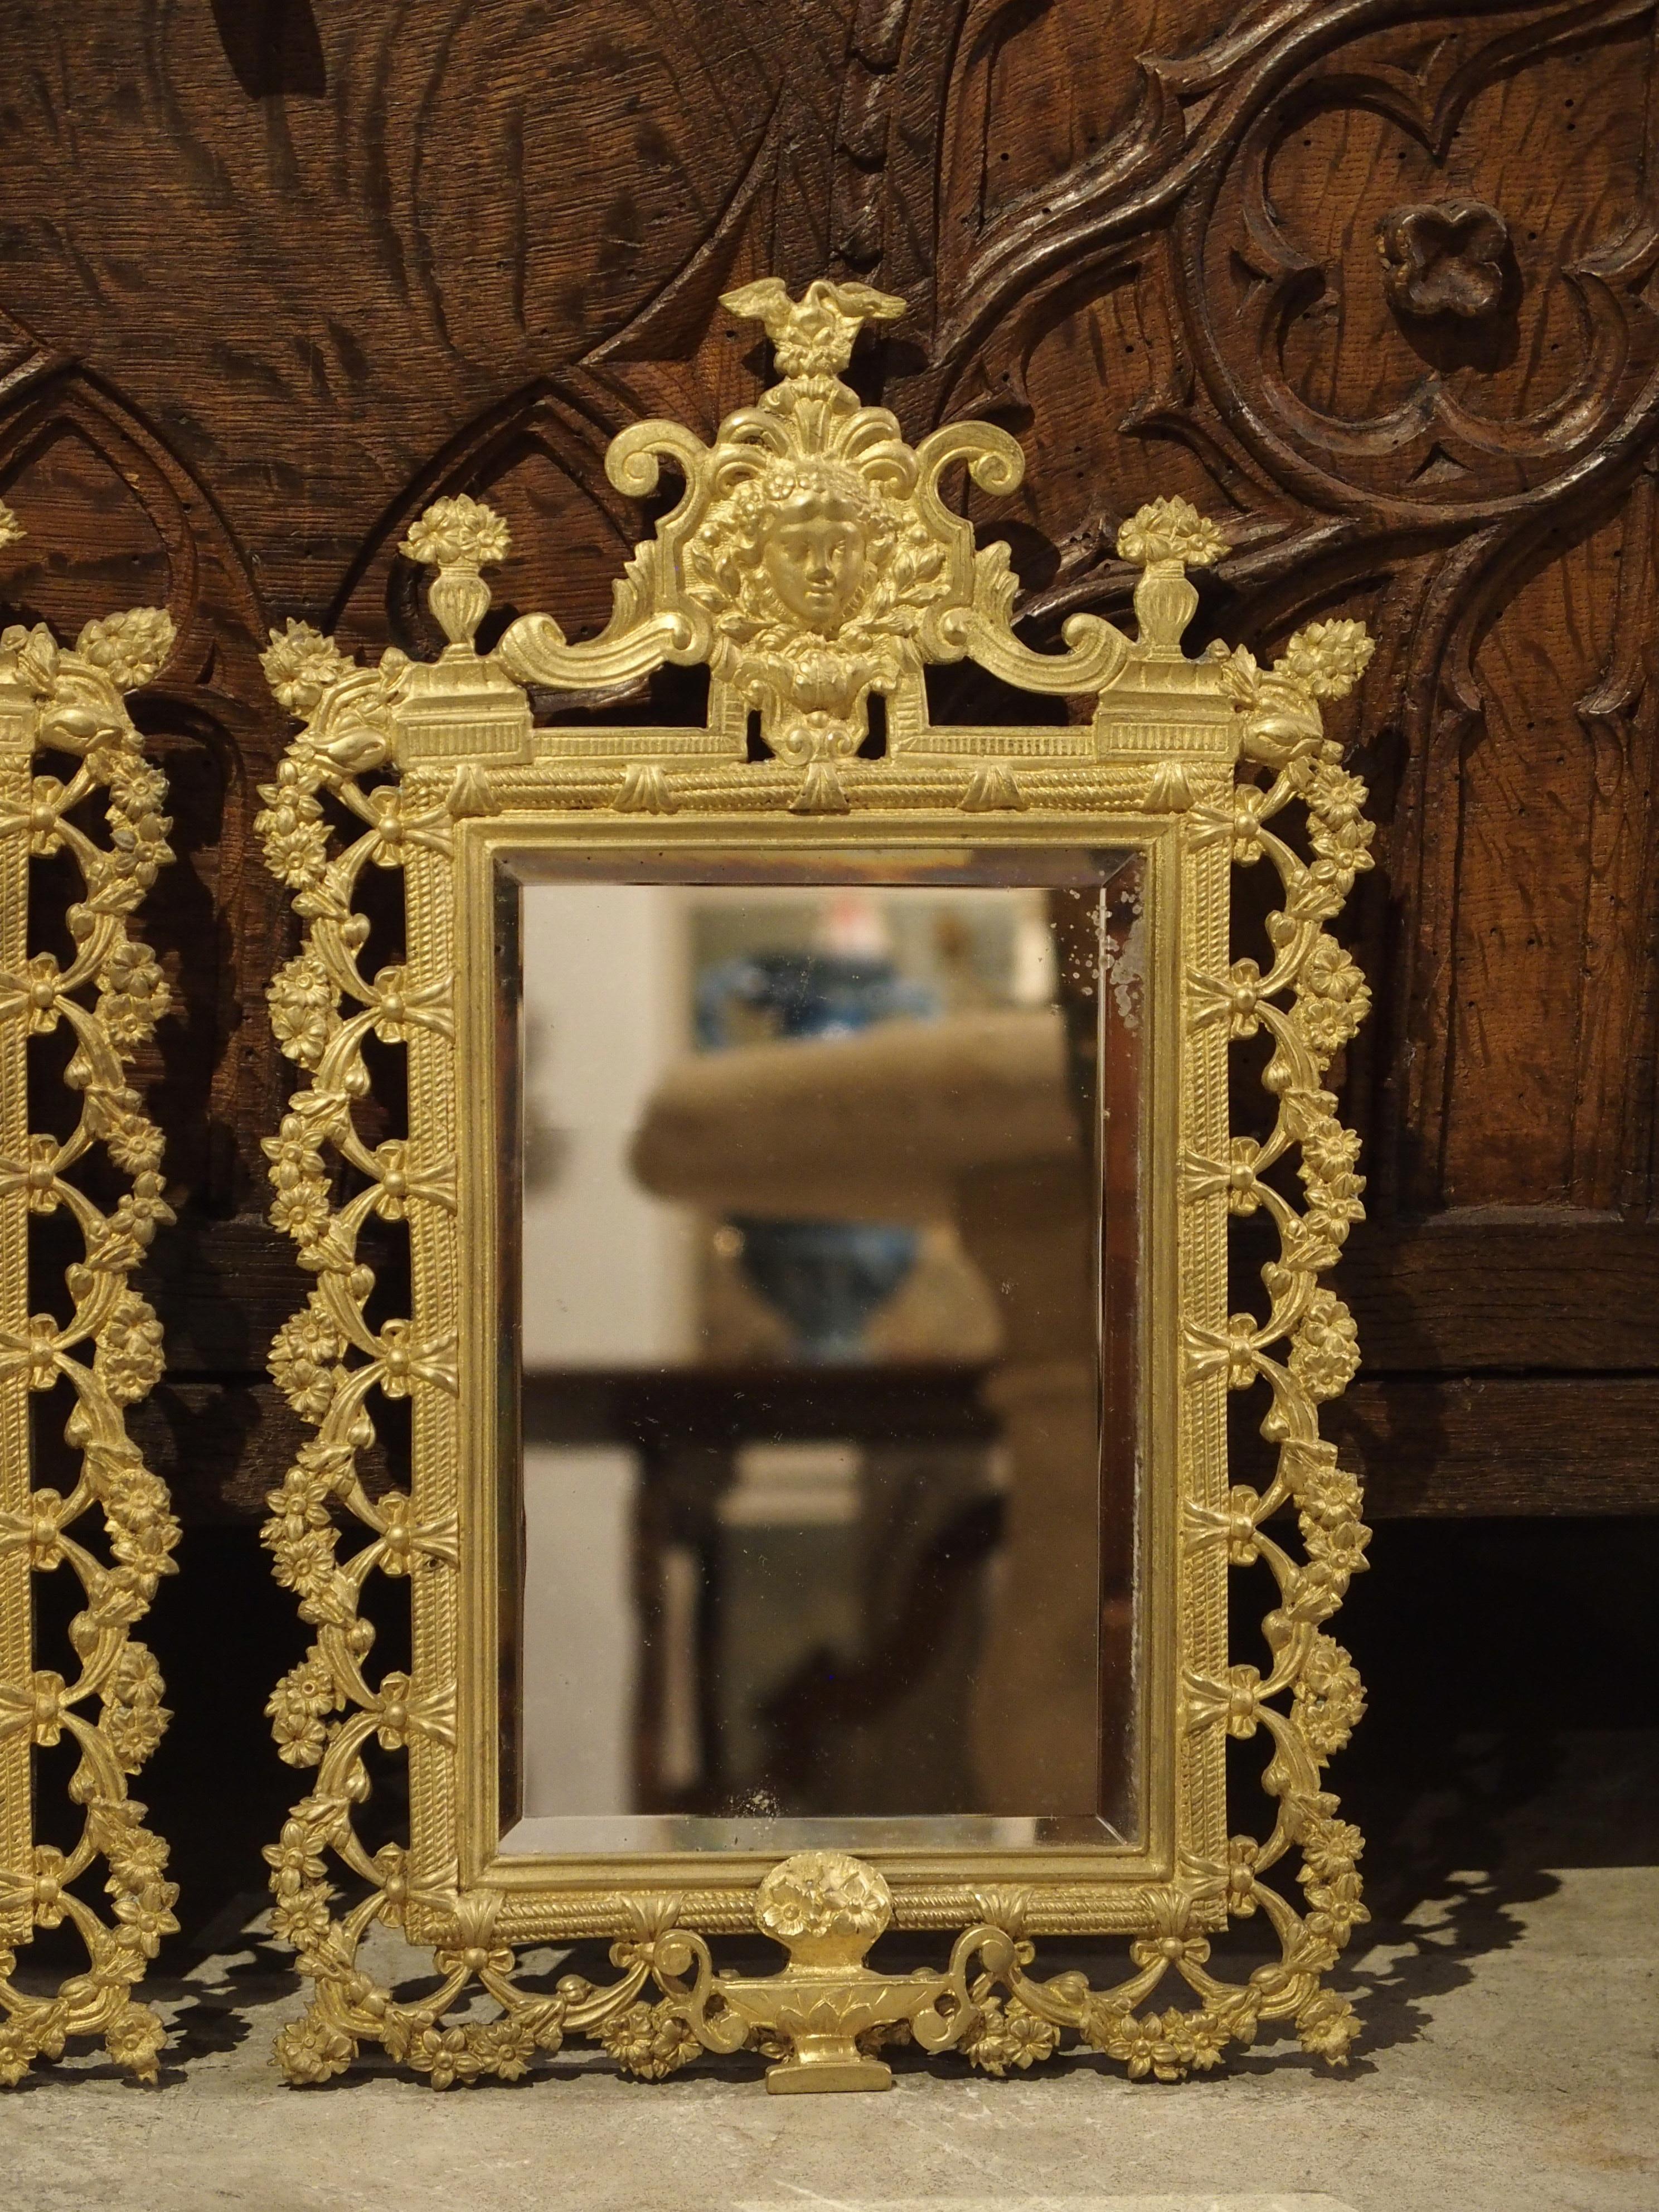 Pair of French Bronze Dore Mirrors with Mascarons and Floral Motifs, circa 1880 For Sale 7